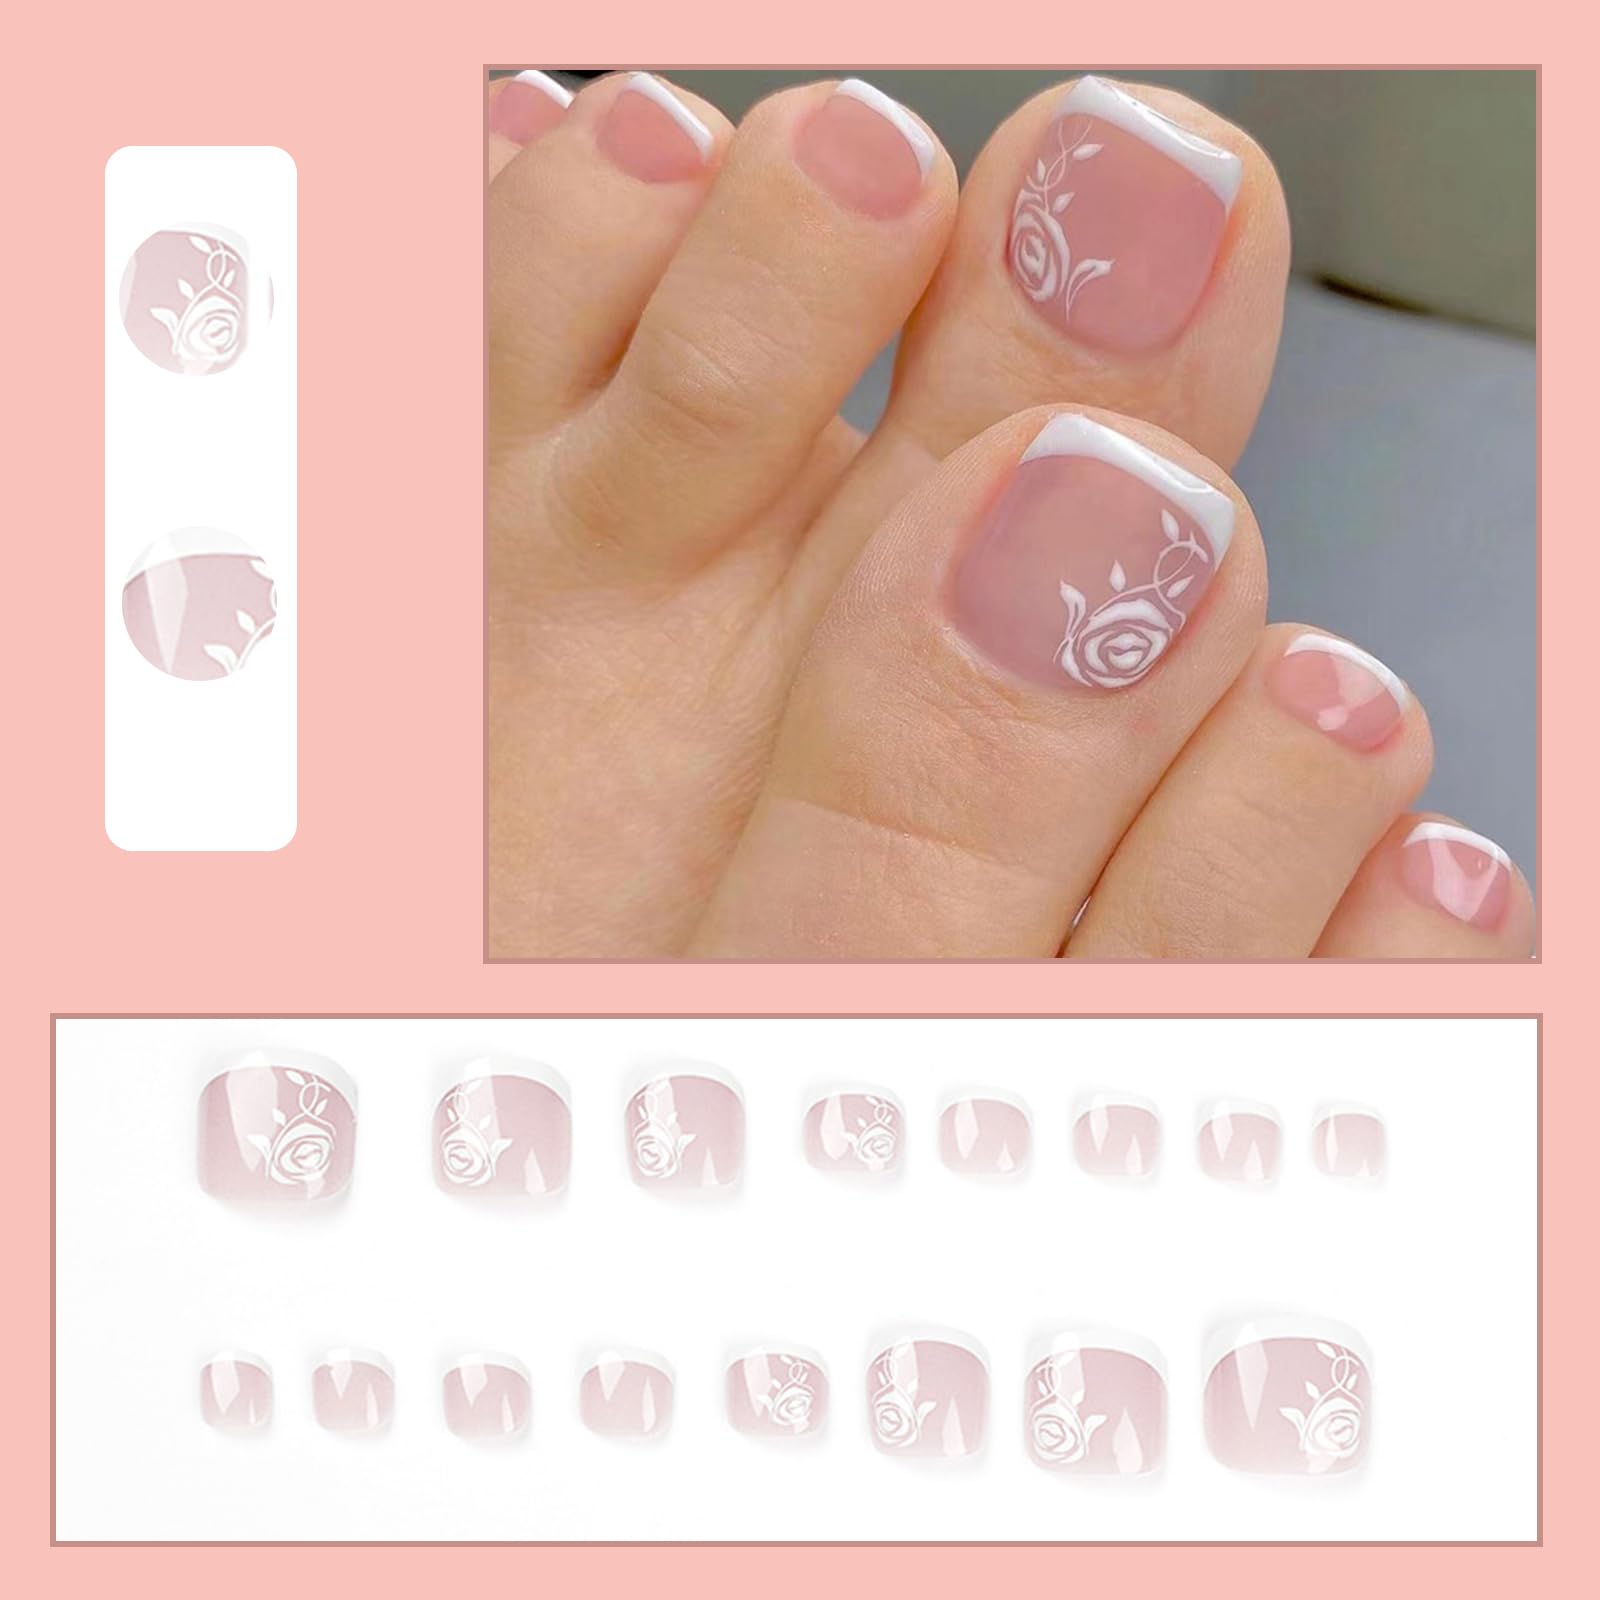 24Pcs Square False Toenails Glossy French Rose Flower Press on Toenails Nude Pink Stick on Toenails Short Acrylic Full Cover Summer Fake Toenails for Women and Girls Daily Decorations